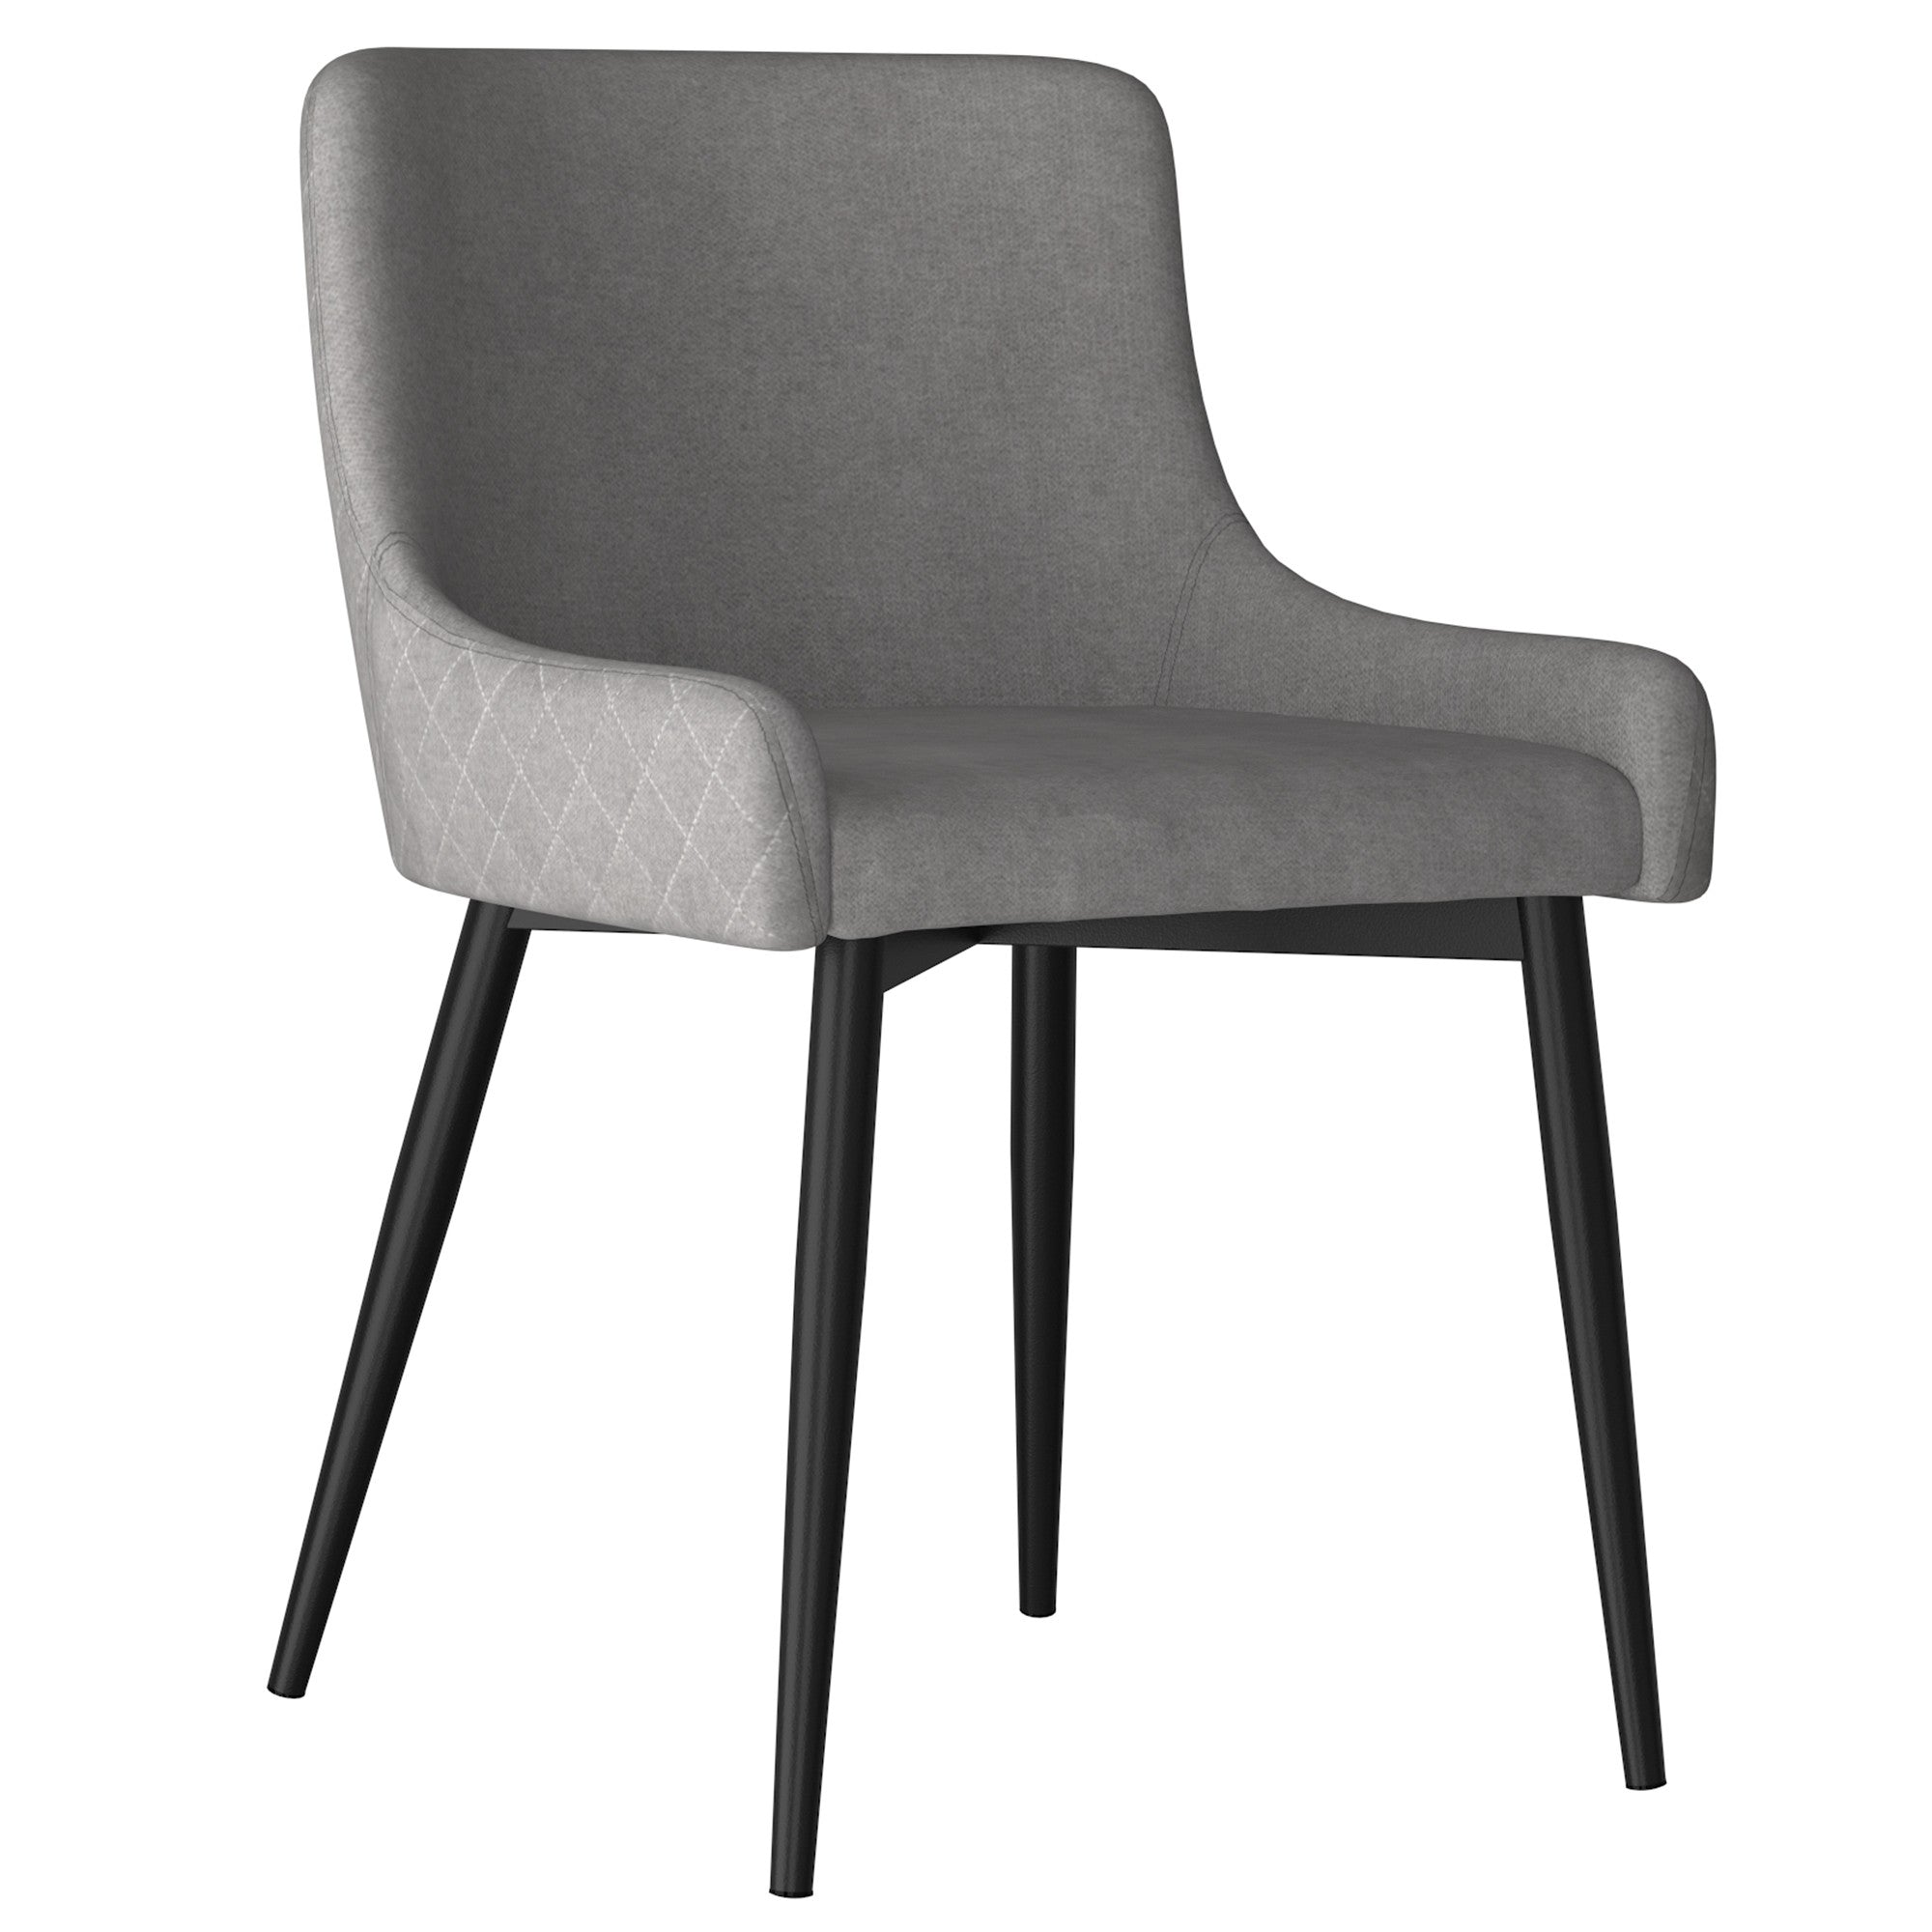 Bianca Side Chair set of 2 in Grey with Black Leg Price 